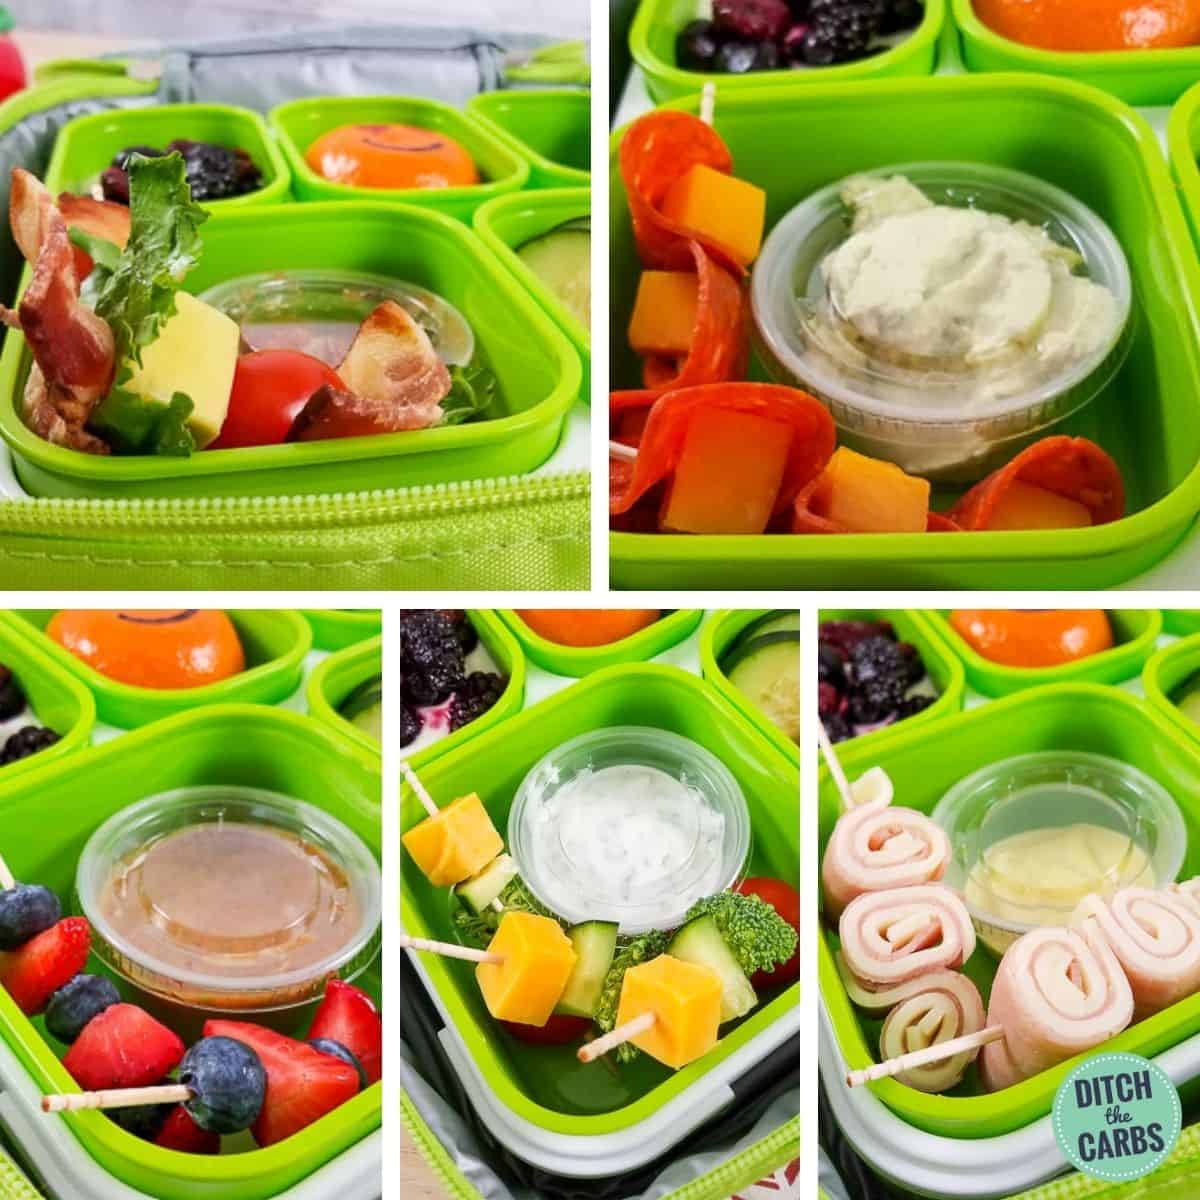 5 Easy Lunchbox Recipes  Healthy Lunch Packs for Kids & Adults